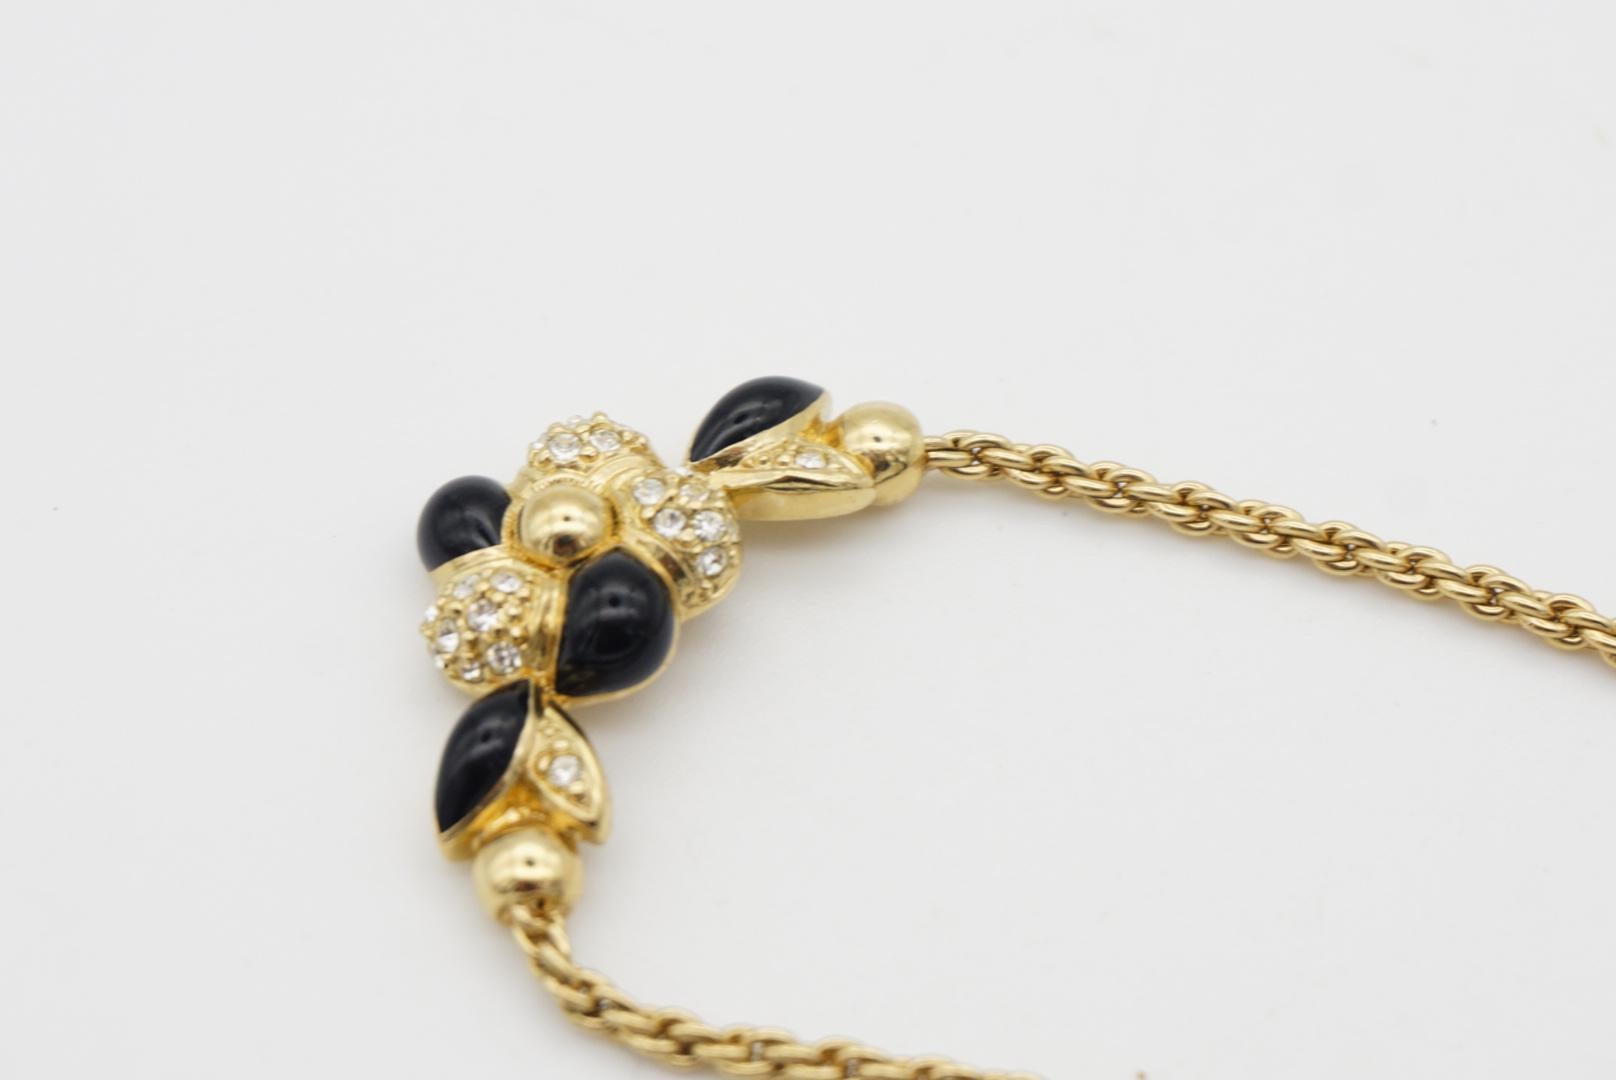 Christian Dior Vintage 1980s Black Enamel Flower Crystals Gold Pendant Necklace  In Excellent Condition For Sale In Wokingham, England